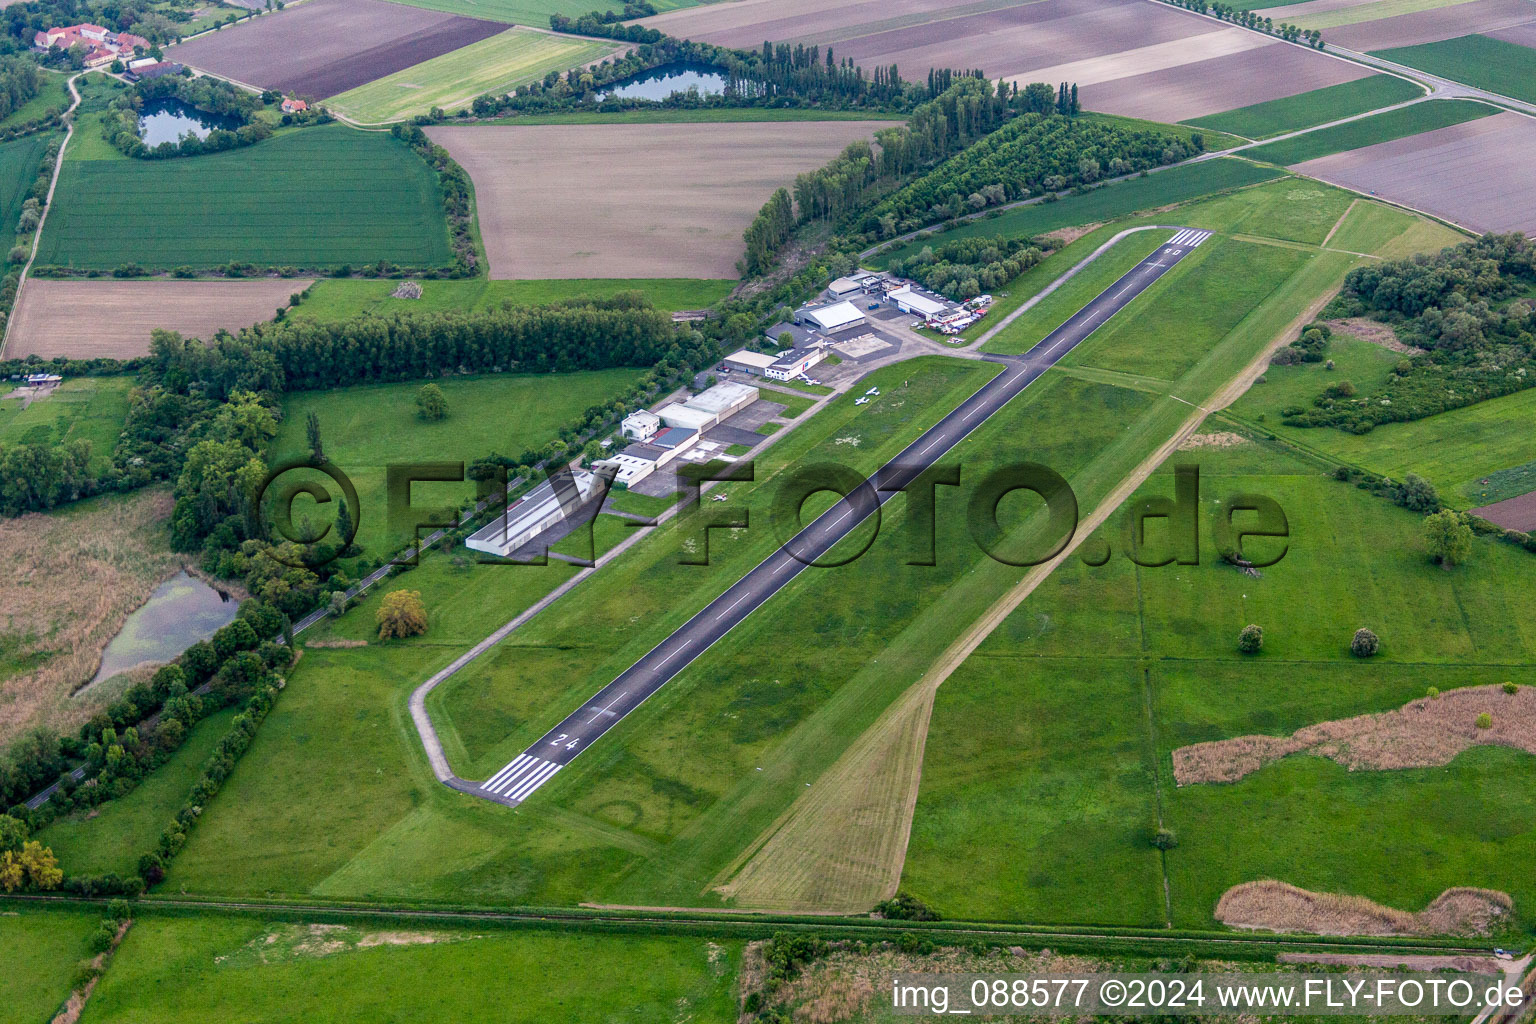 Runway with tarmac terrain of airfield in Worms in the state Rhineland-Palatinate, Germany